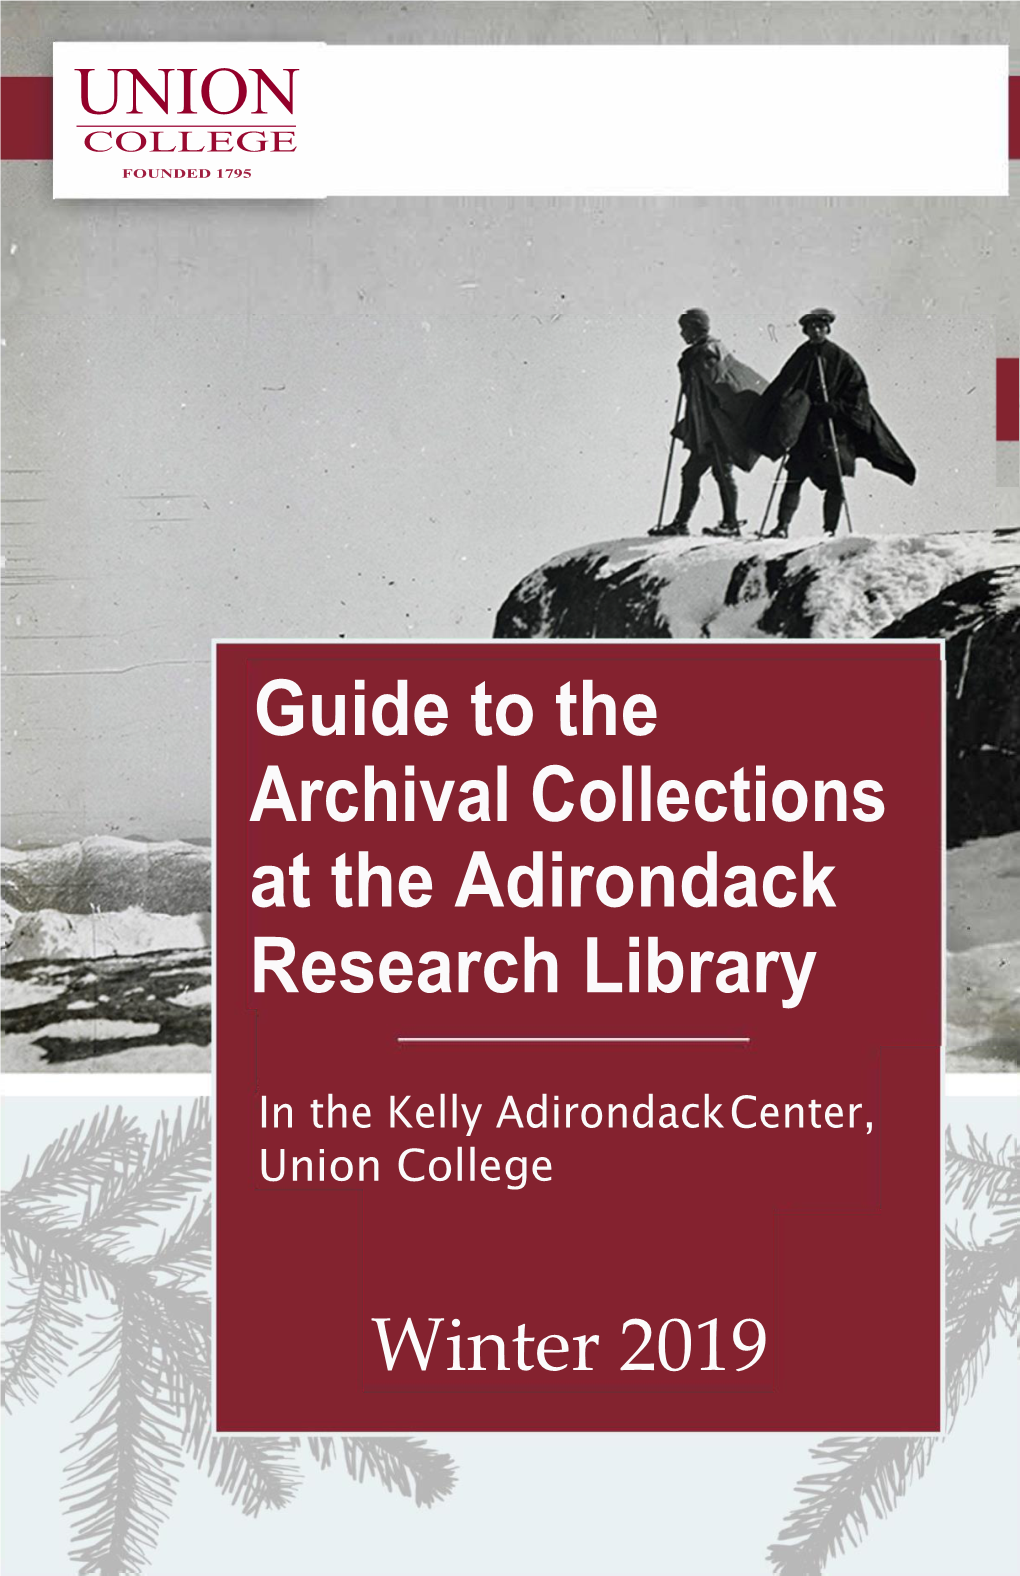 Guide to the Archival Collections at the Adirondack Research Library